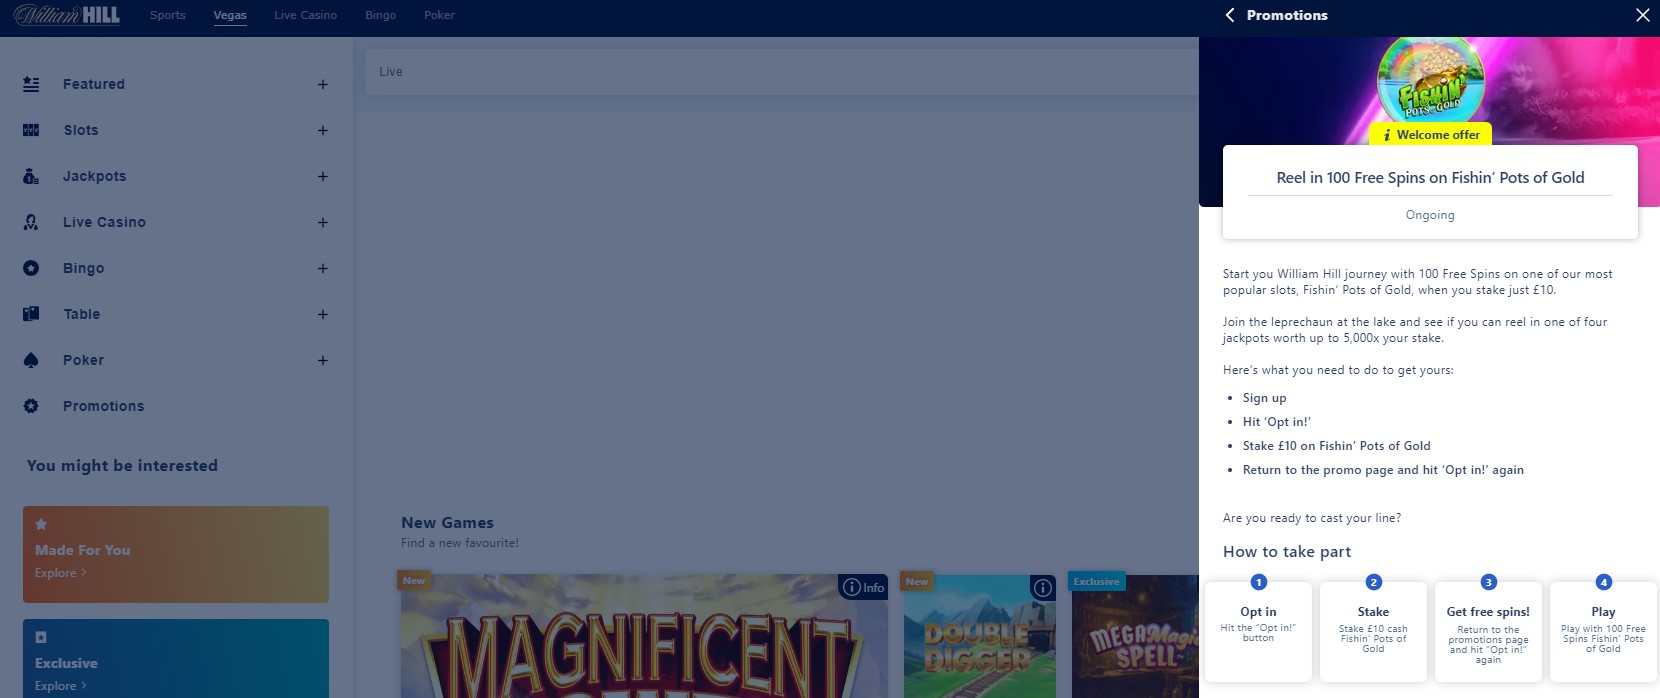 williamhill 100 free spins no wager